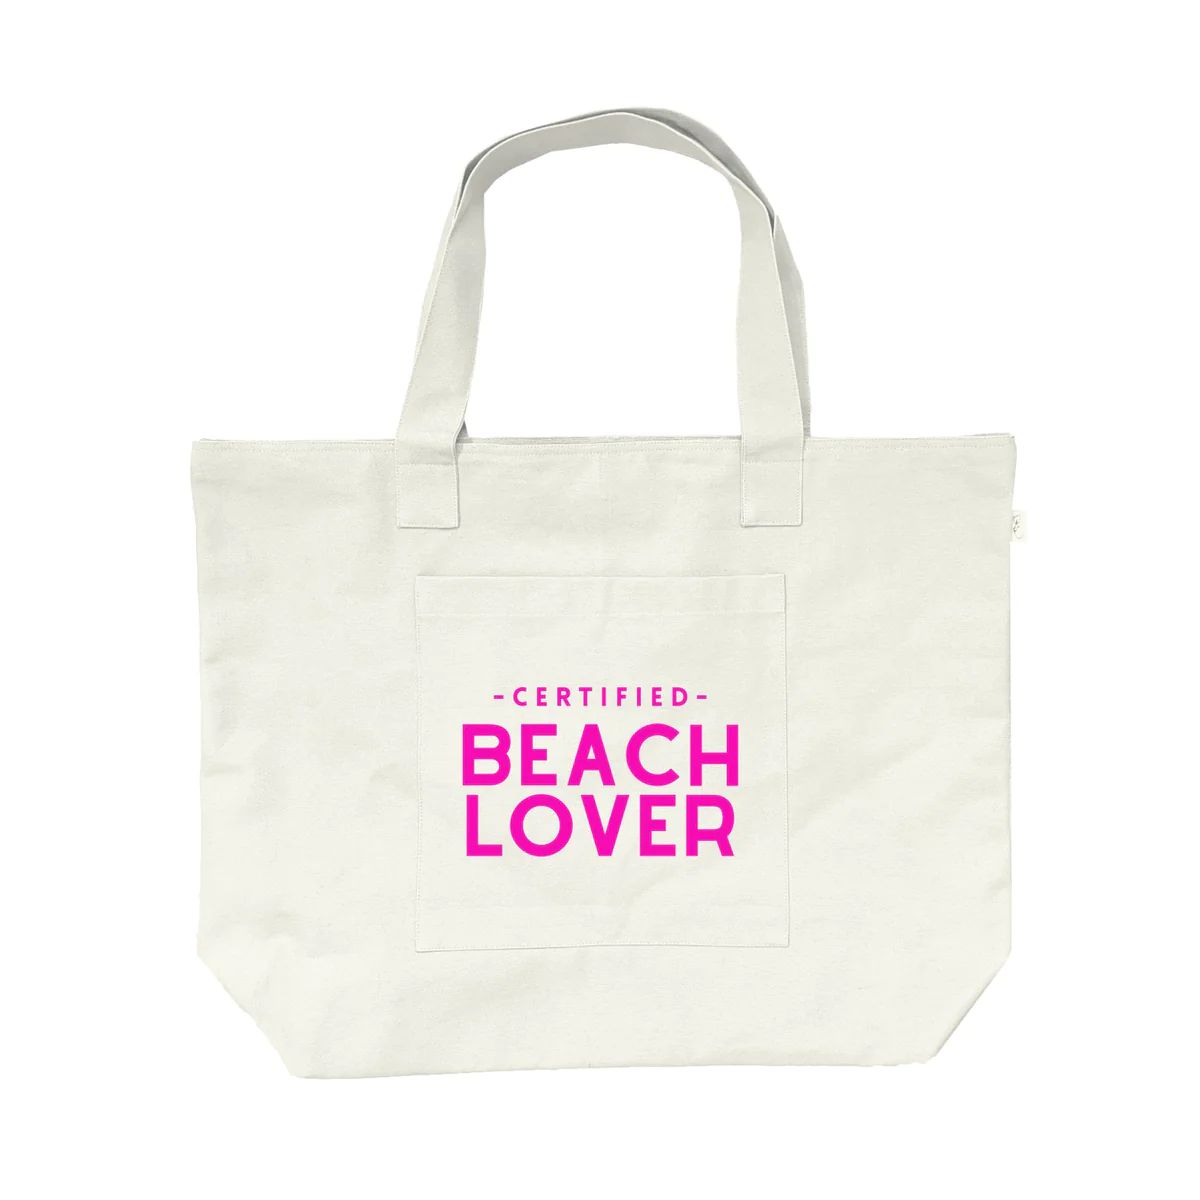 NEW! Everything Bag Natural with Neon Pink Certified Beach Lover | Quilted Koala